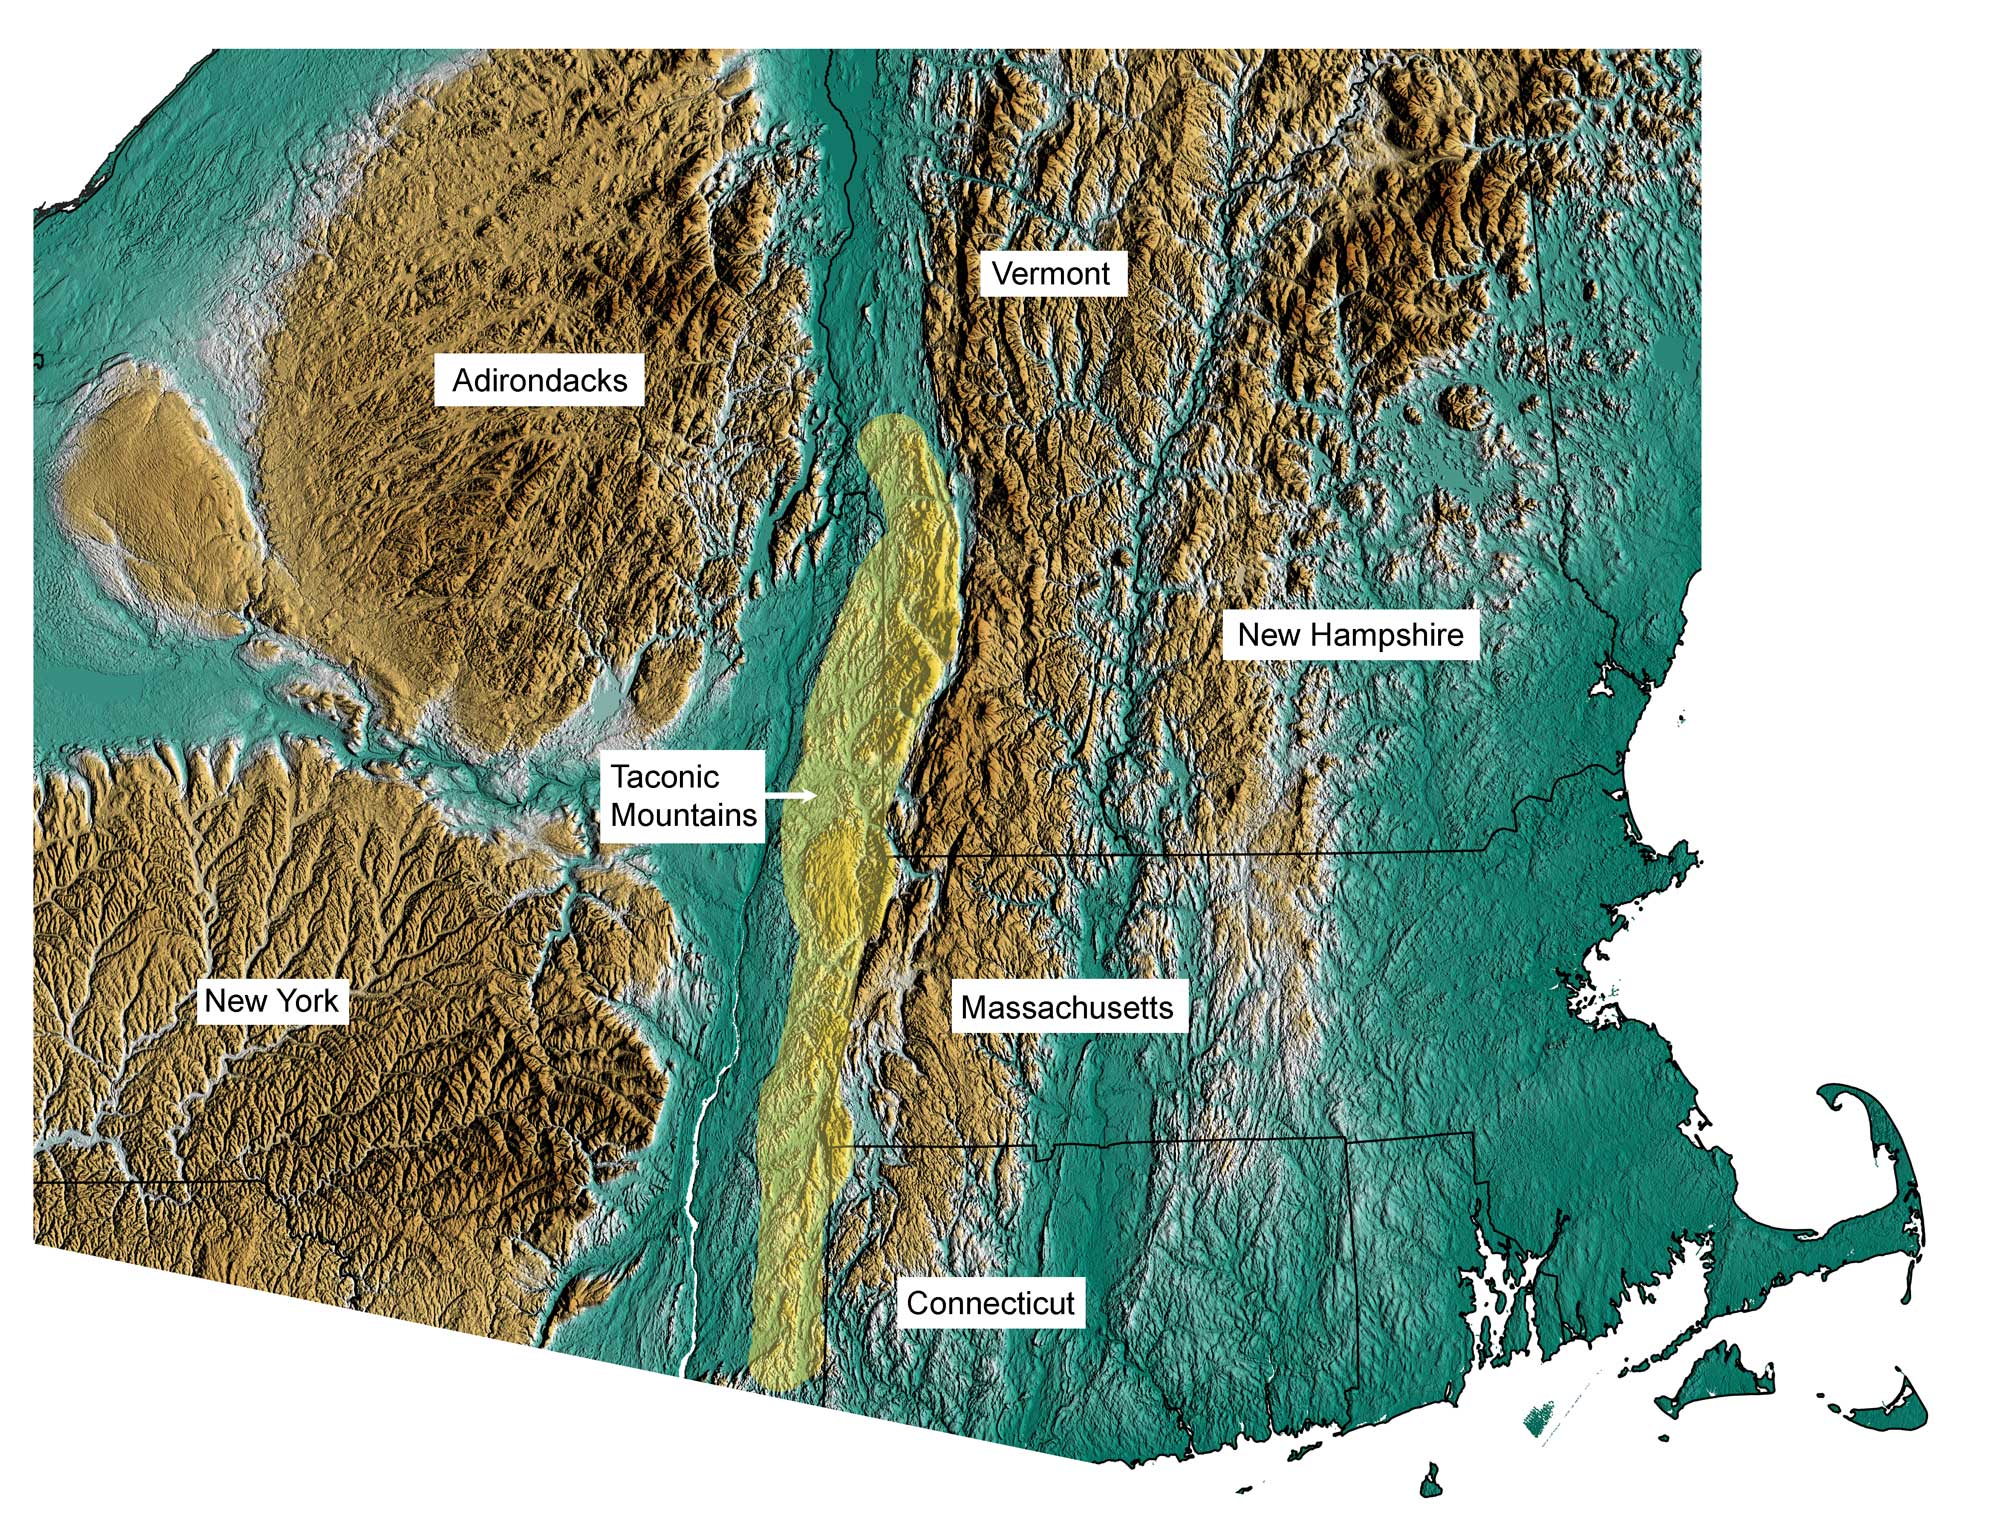 Topographic map showing the position of the Taconic Mountains.